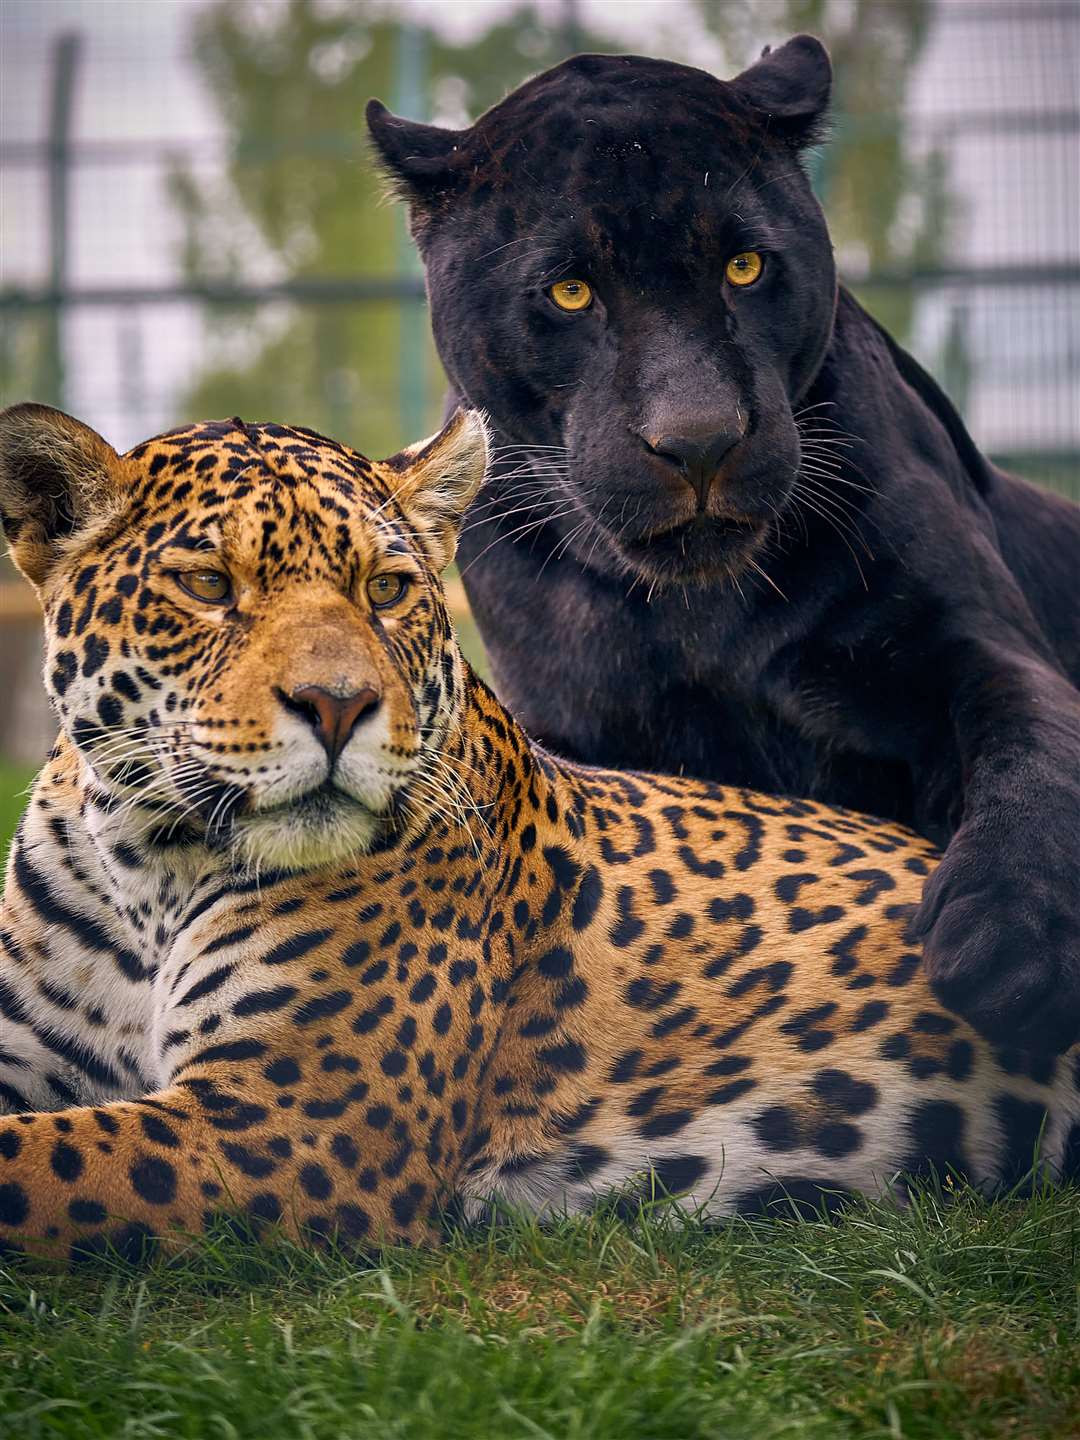 Keira and Neron are the sanctuary's highest hopes for a breeding pair of jaguars